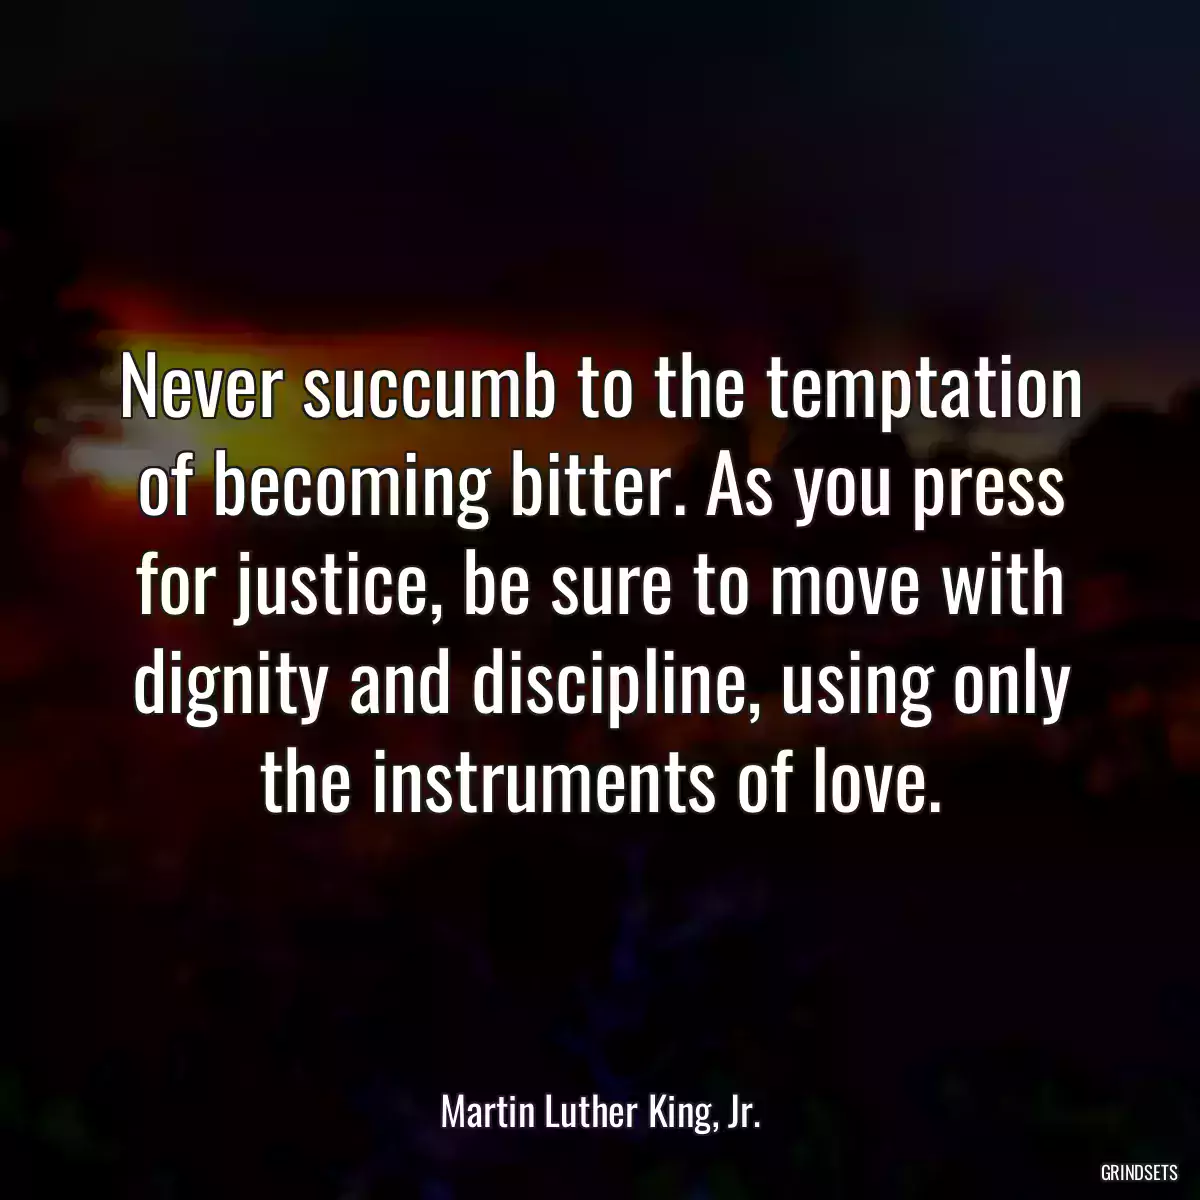 Never succumb to the temptation of becoming bitter. As you press for justice, be sure to move with dignity and discipline, using only the instruments of love.